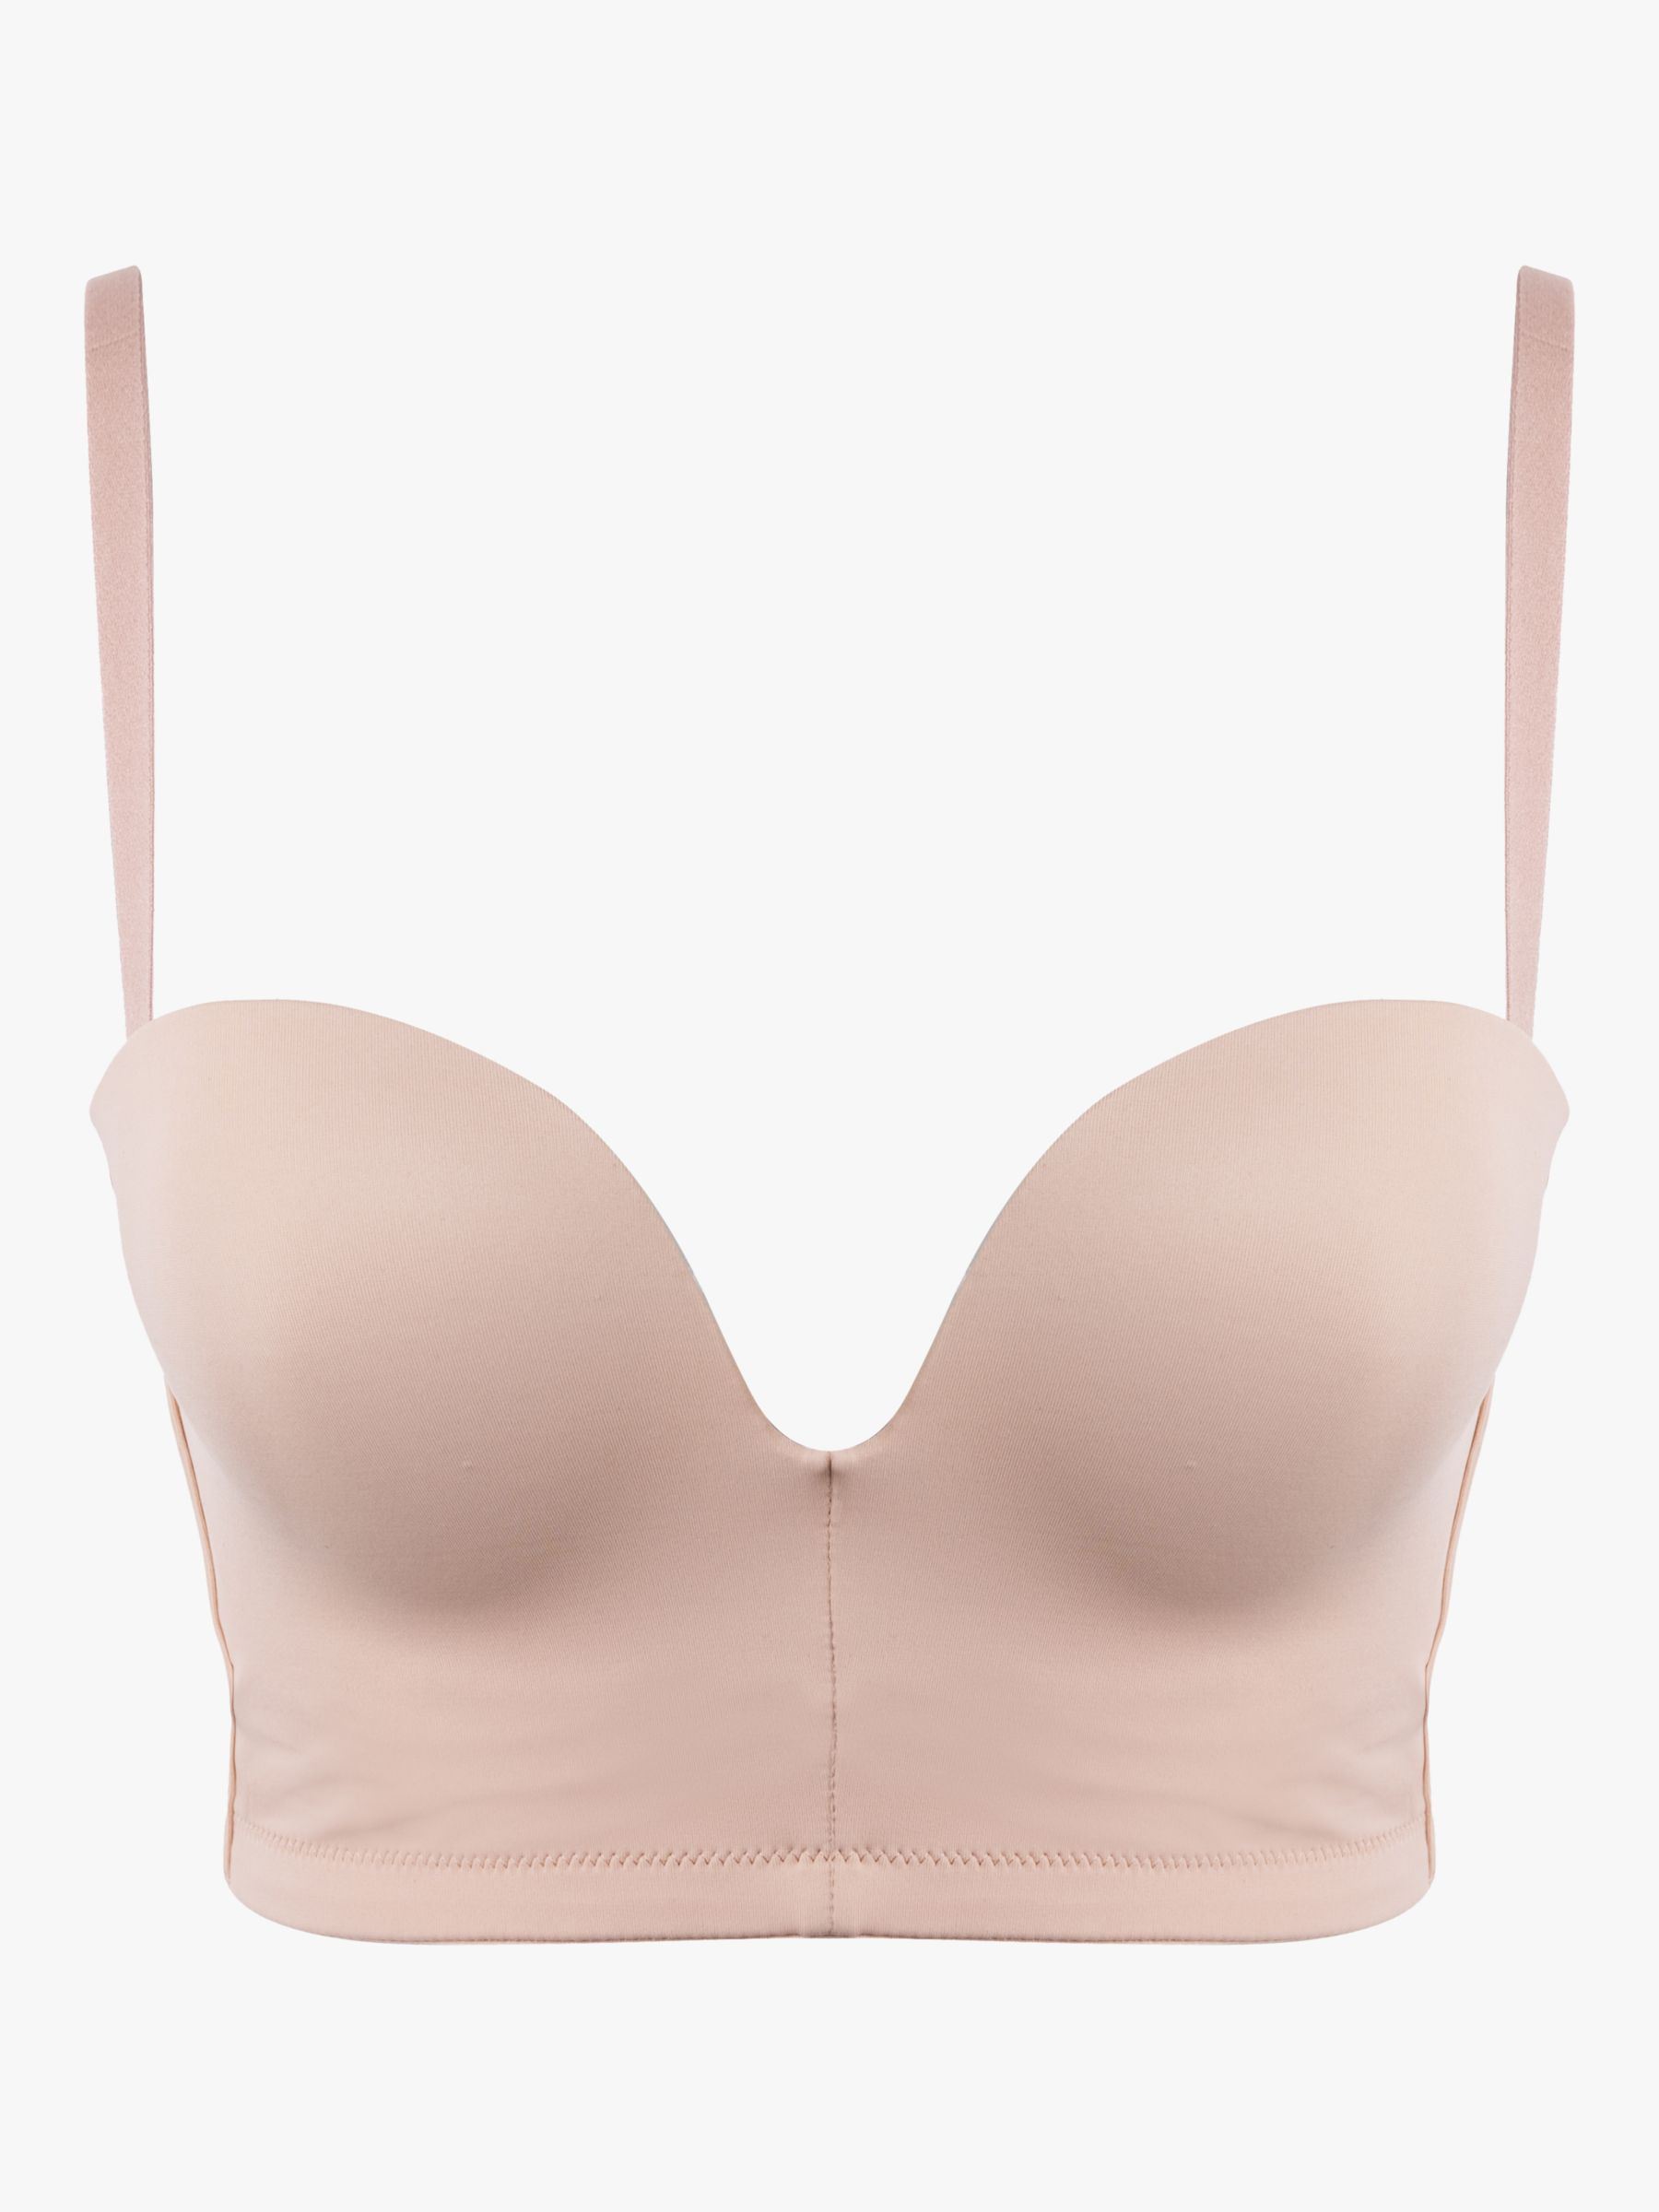 Wonderbra - 'the star of the show! The brand new Ultimate Backless bra  is made from soft, breathable fabric in black or nude, with an adjustable low  back strap and just the